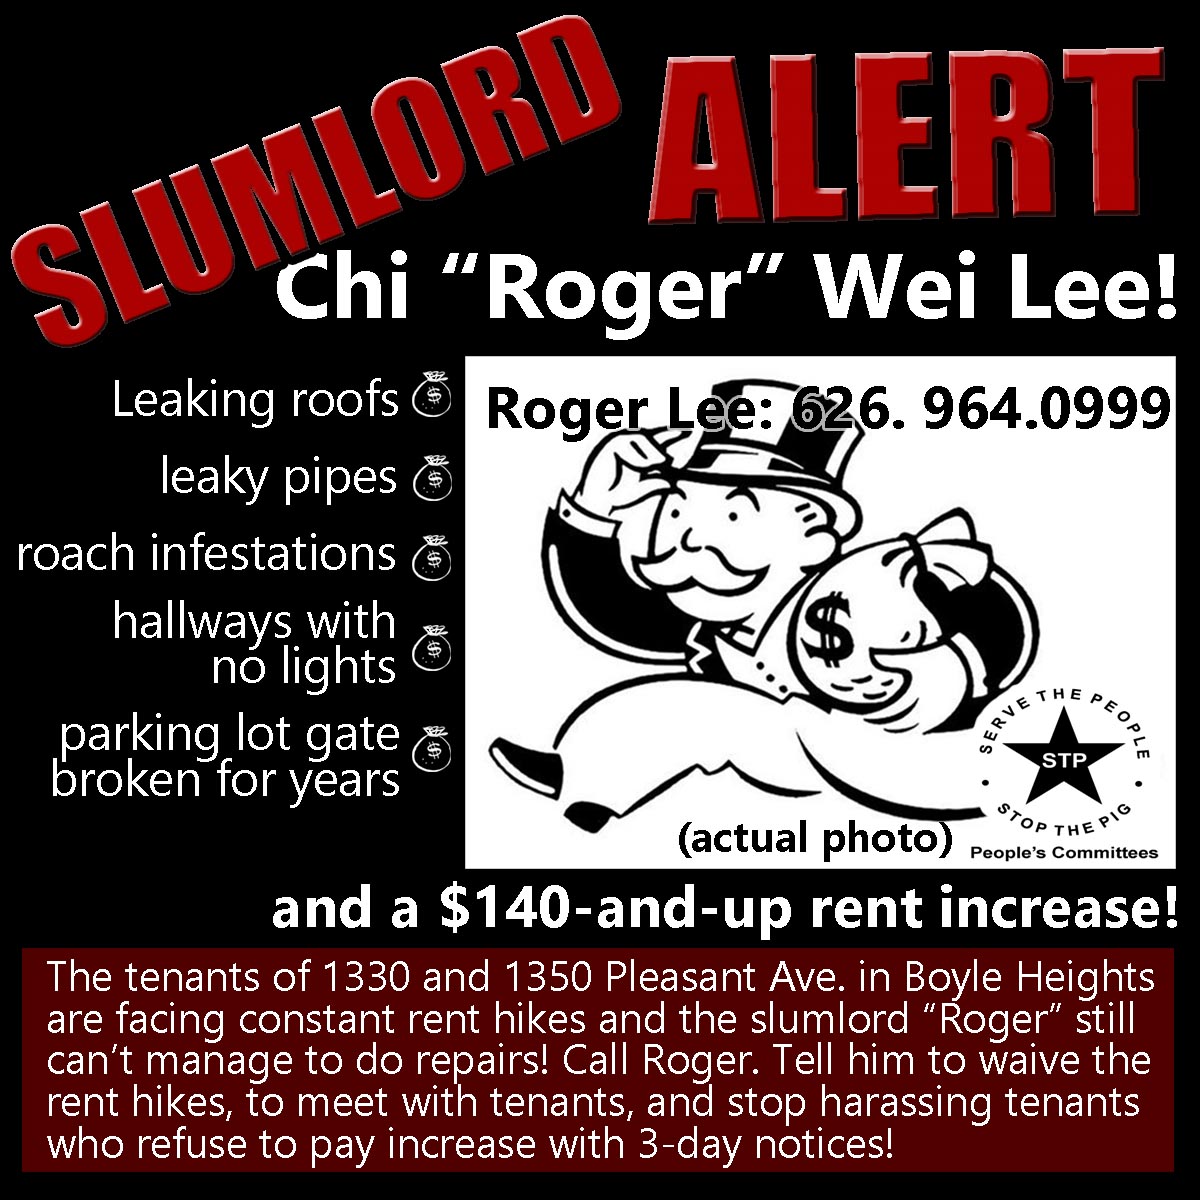 Slumlord Roger stealing from the neighborhood